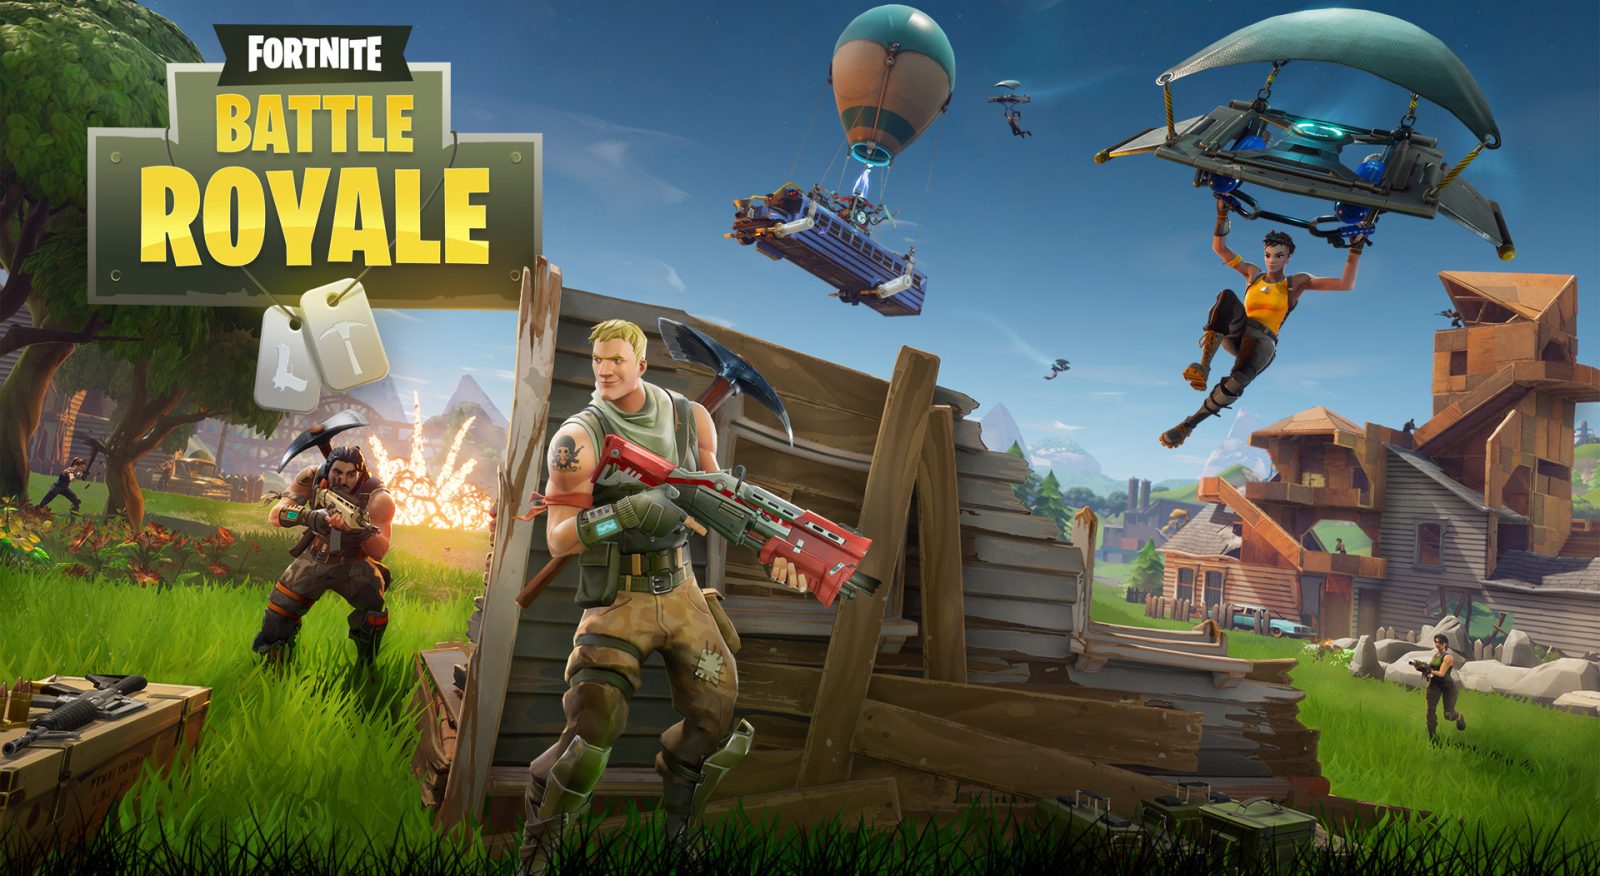 You Can Play Fortnite On Nintendo Switch For Free Download Now On - you can play fortnite on nintendo switch for free download now on the eshop